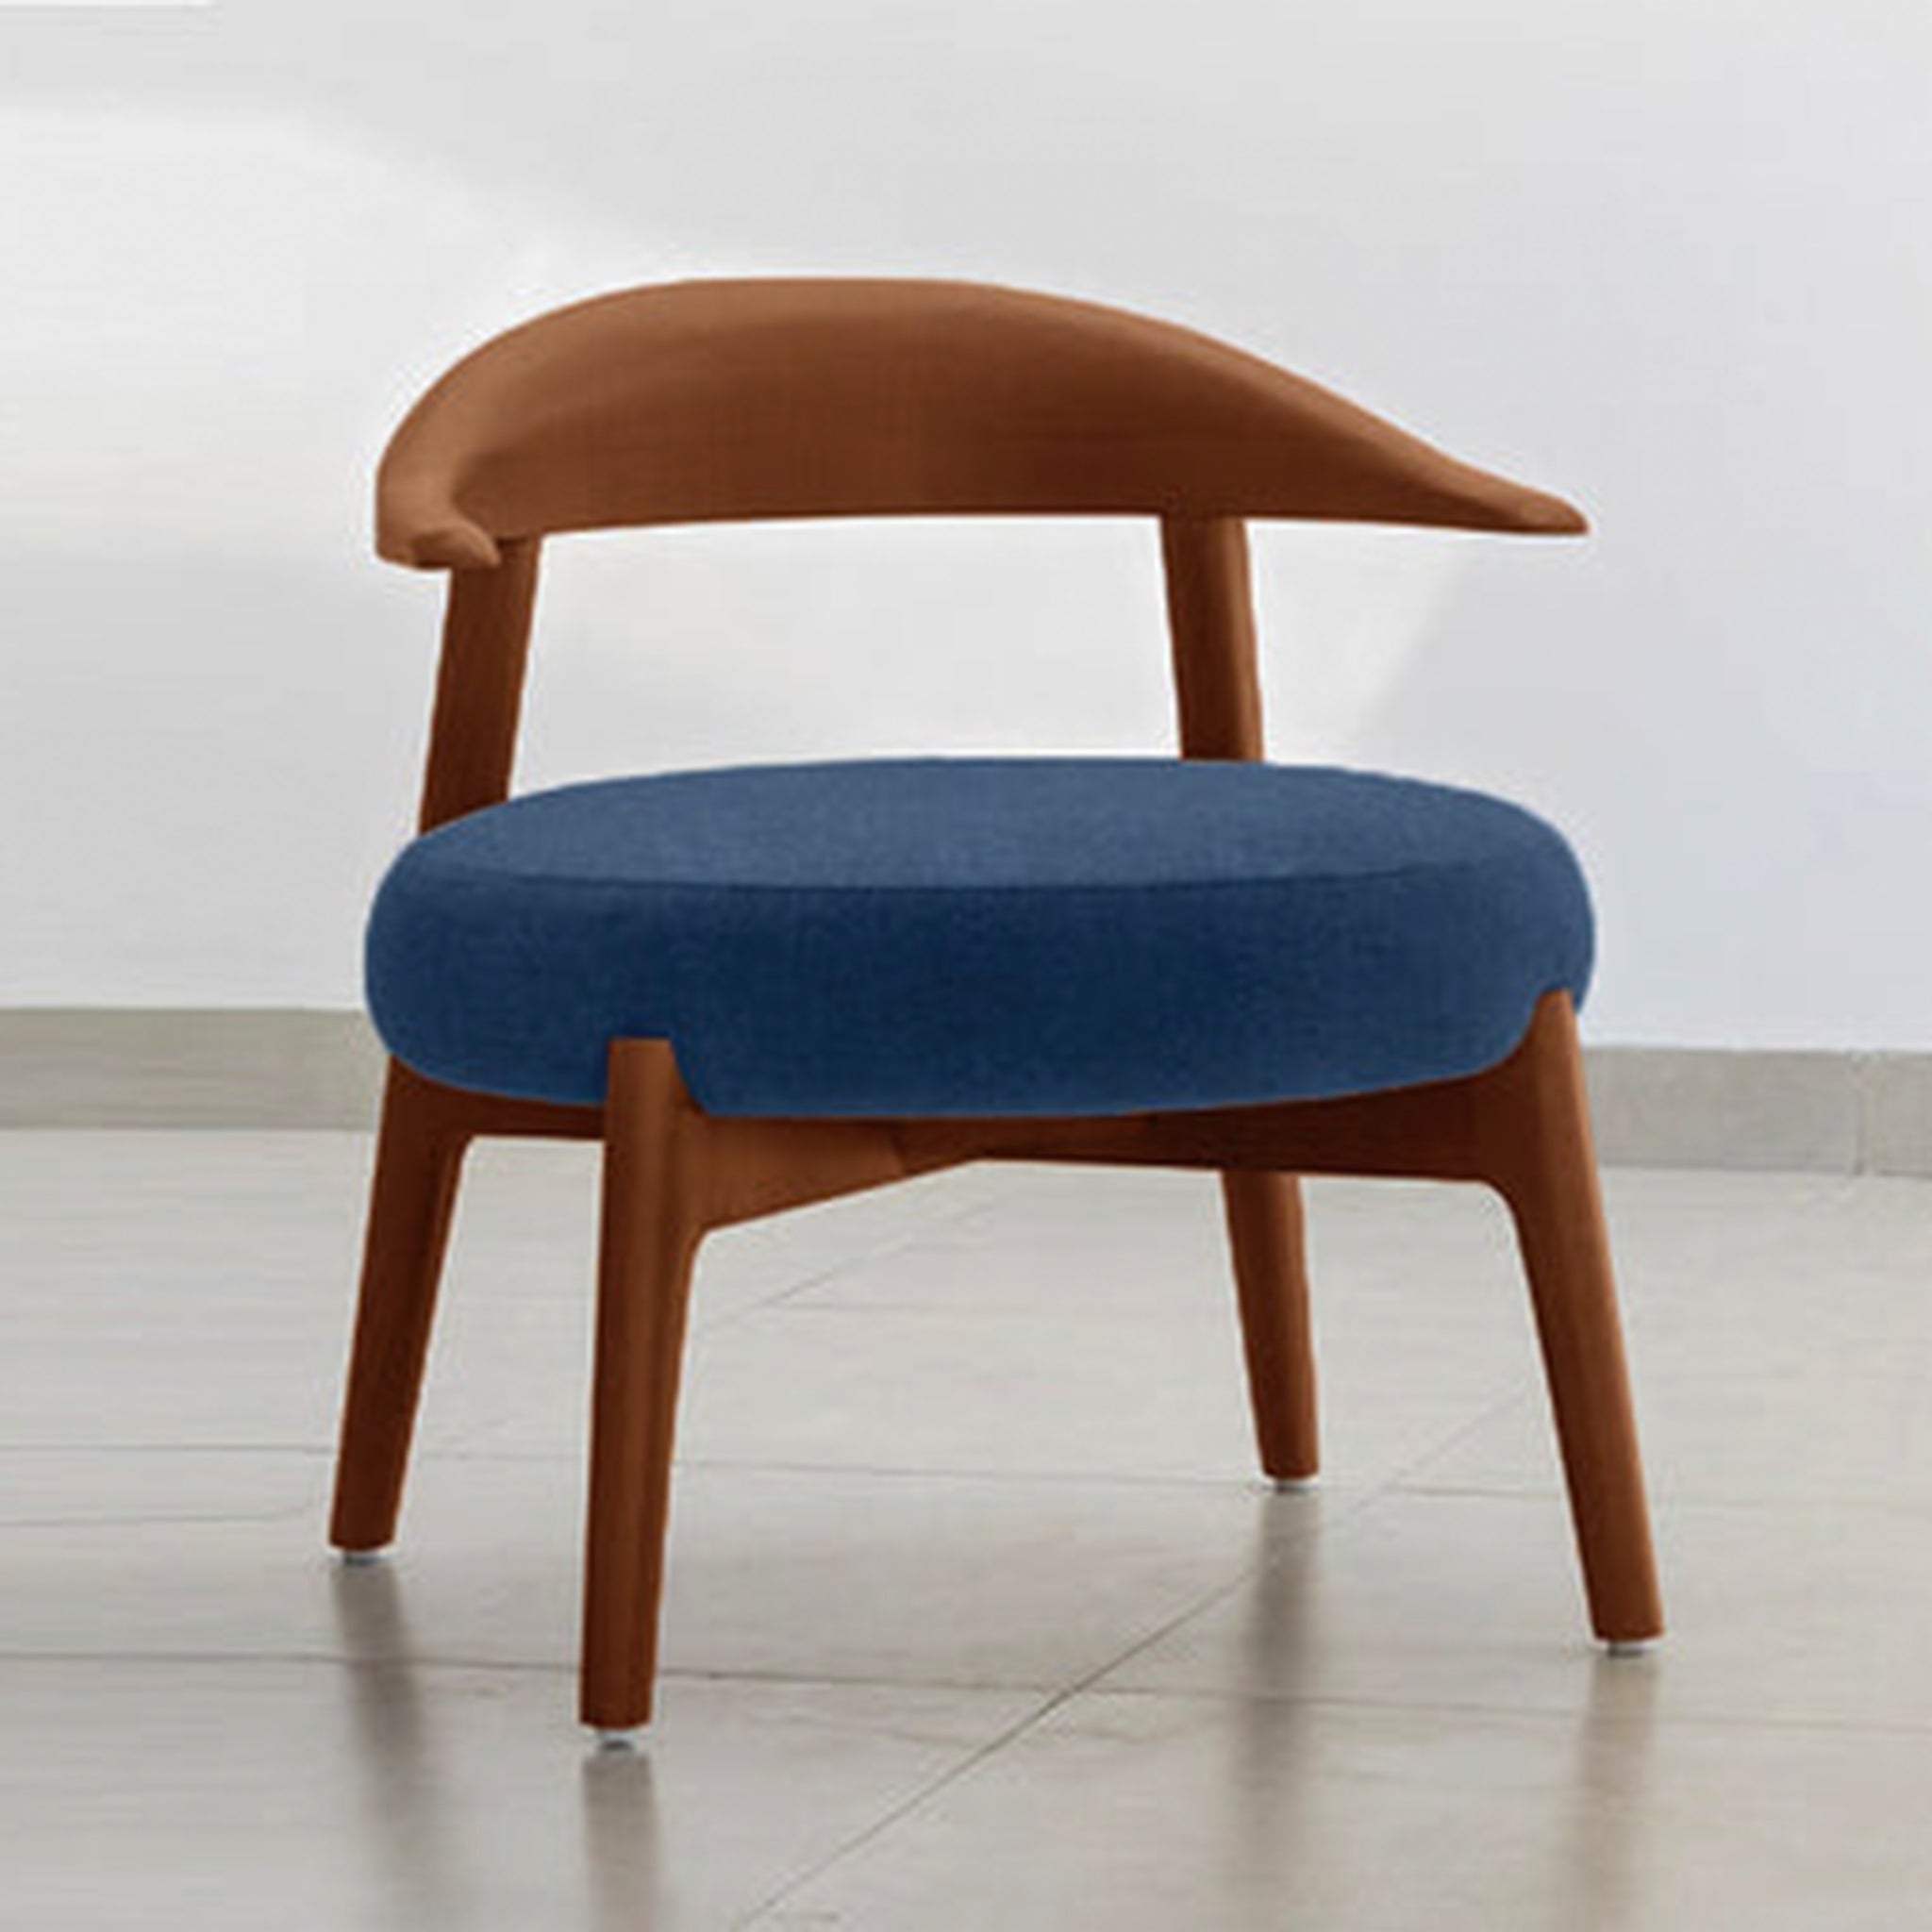 "Sophisticated and stylish Hyde Accent Chair for contemporary spaces"